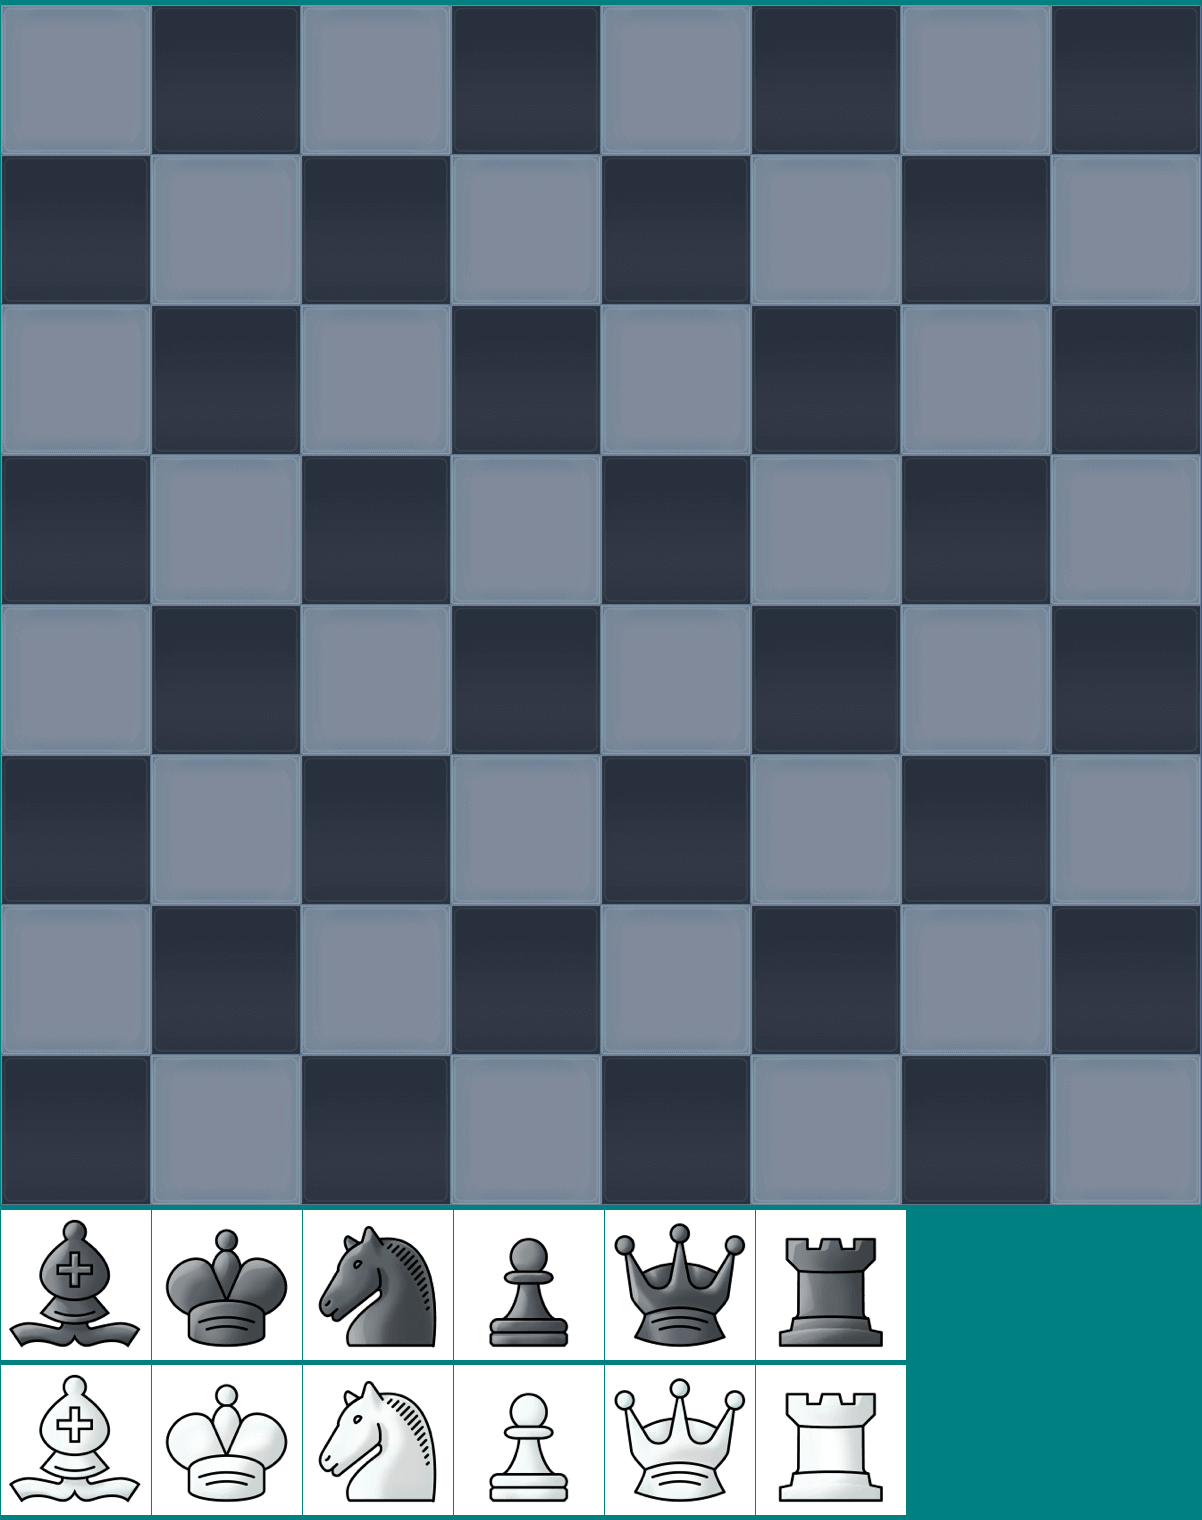 Board and Chess Pieces (Glass)